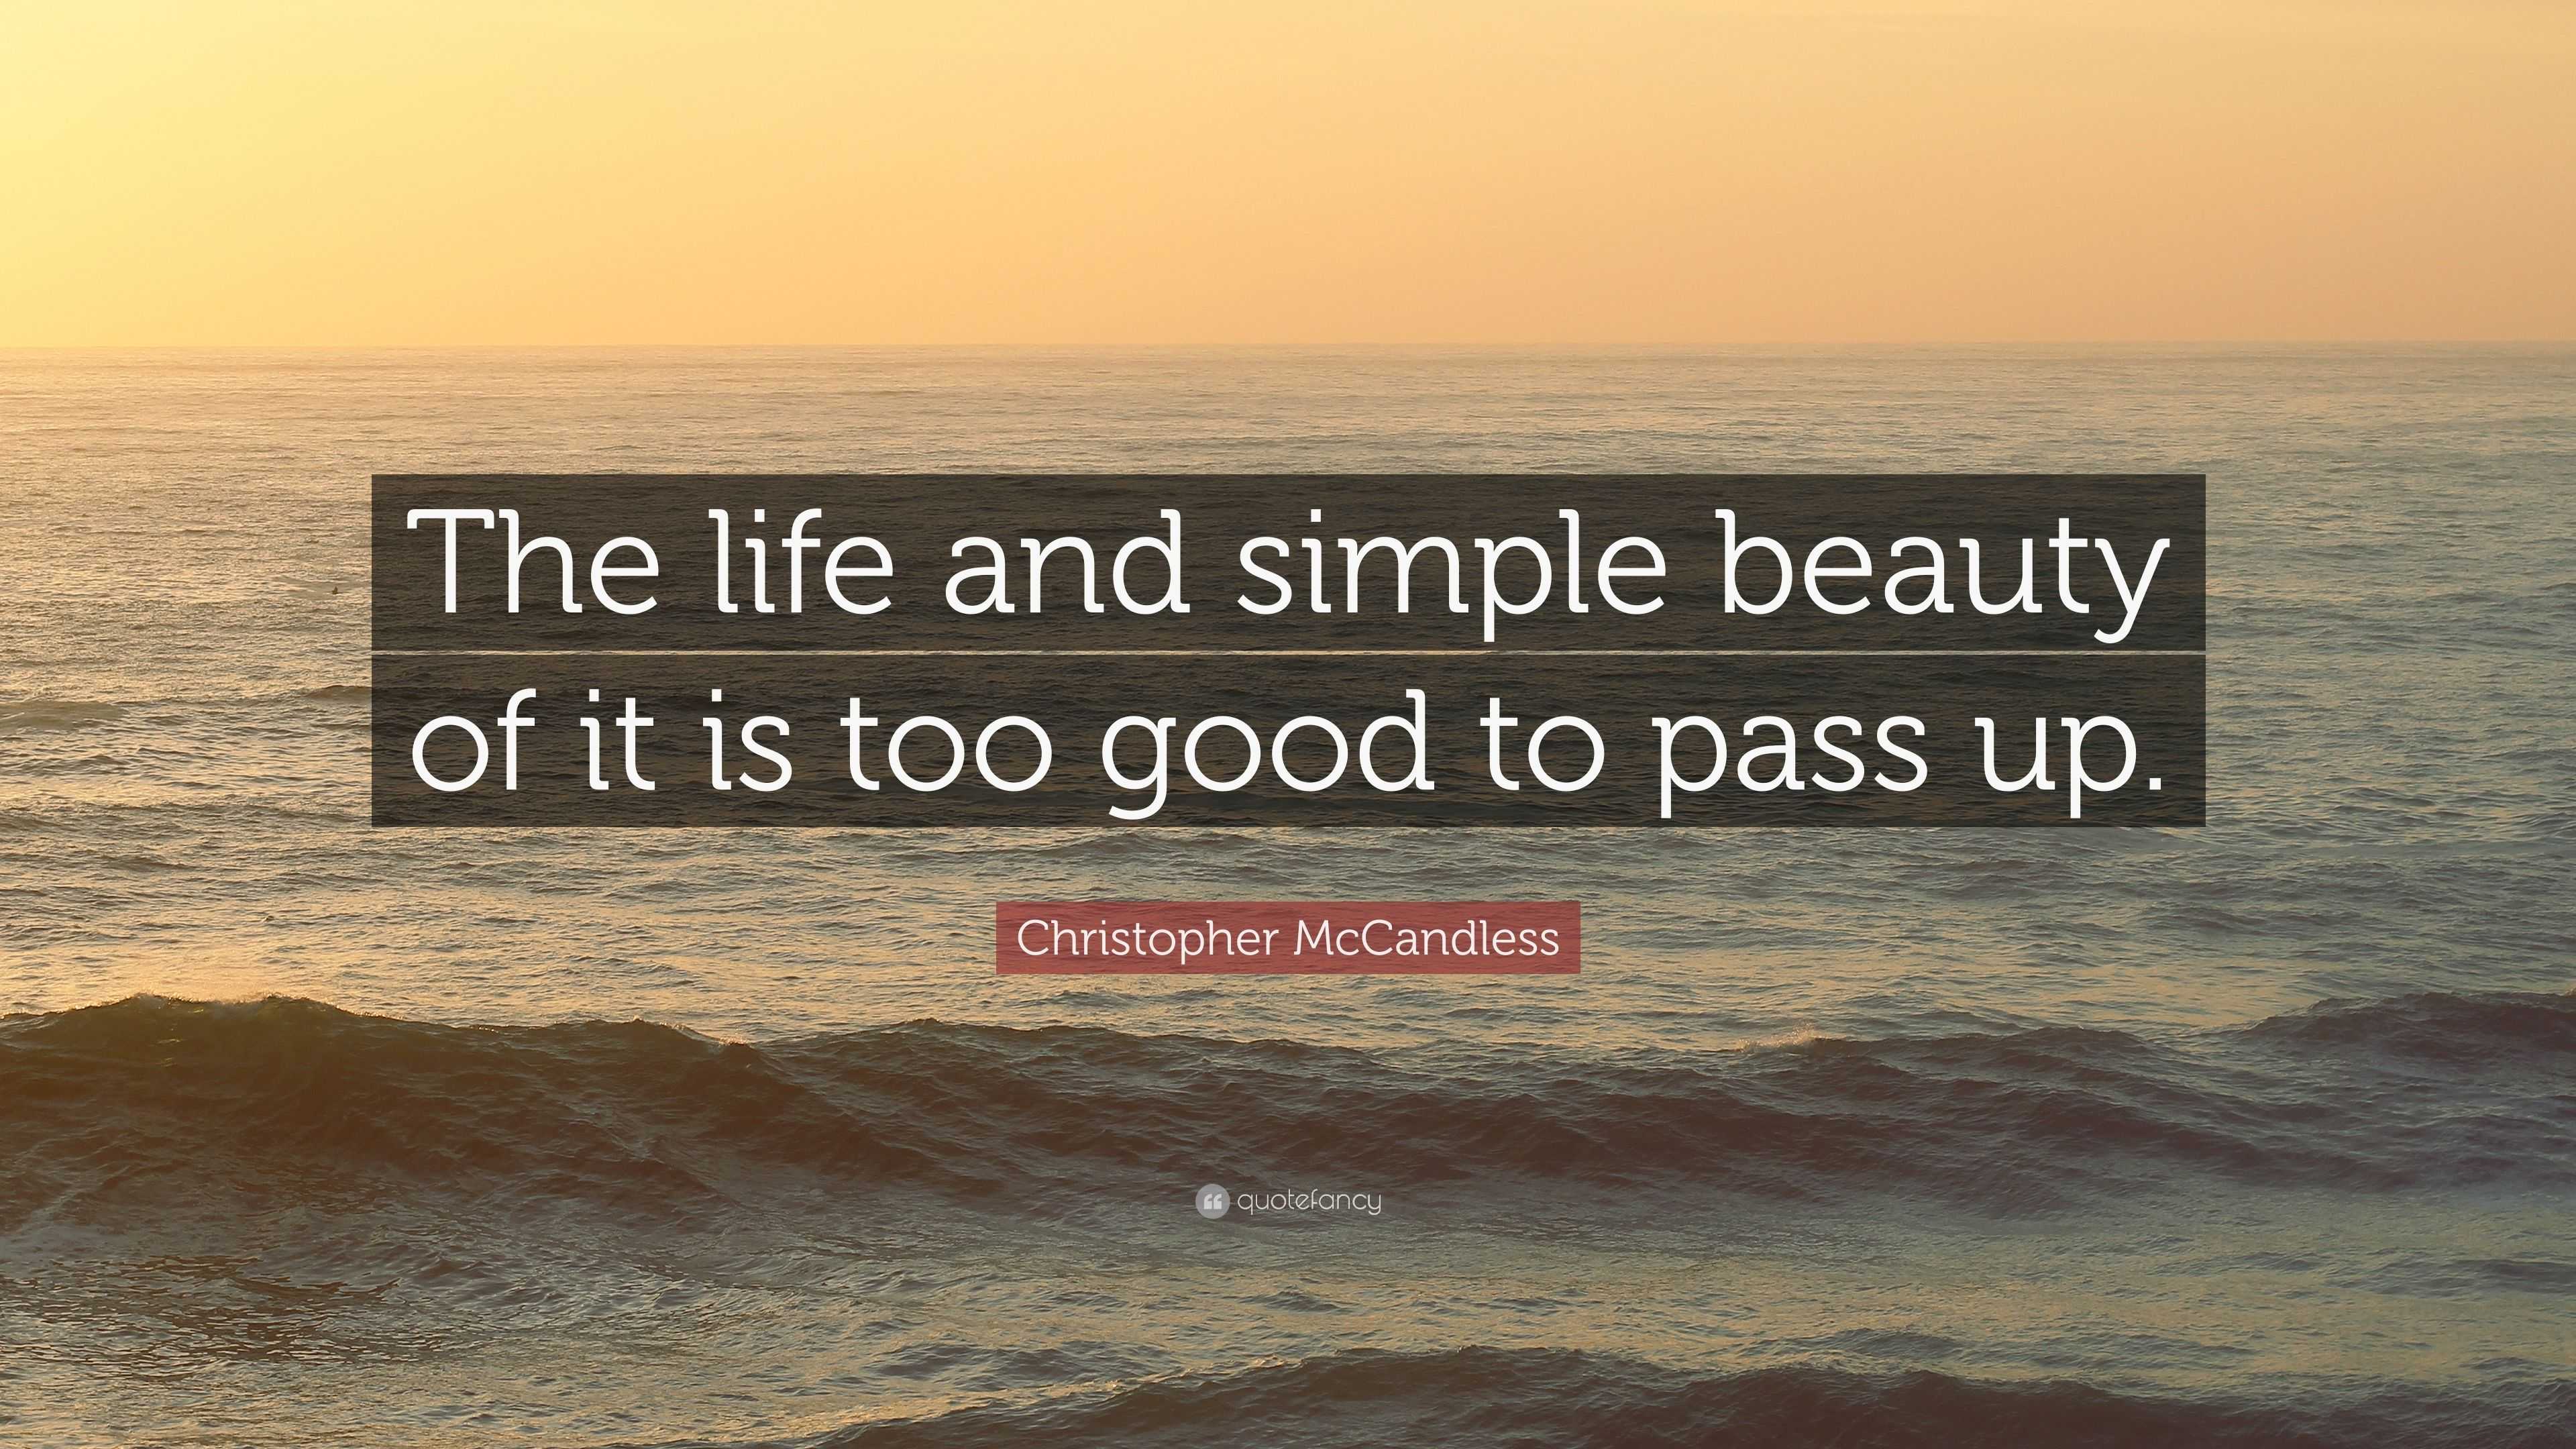 Christopher McCandless Quote The life and simple beauty of it is too 